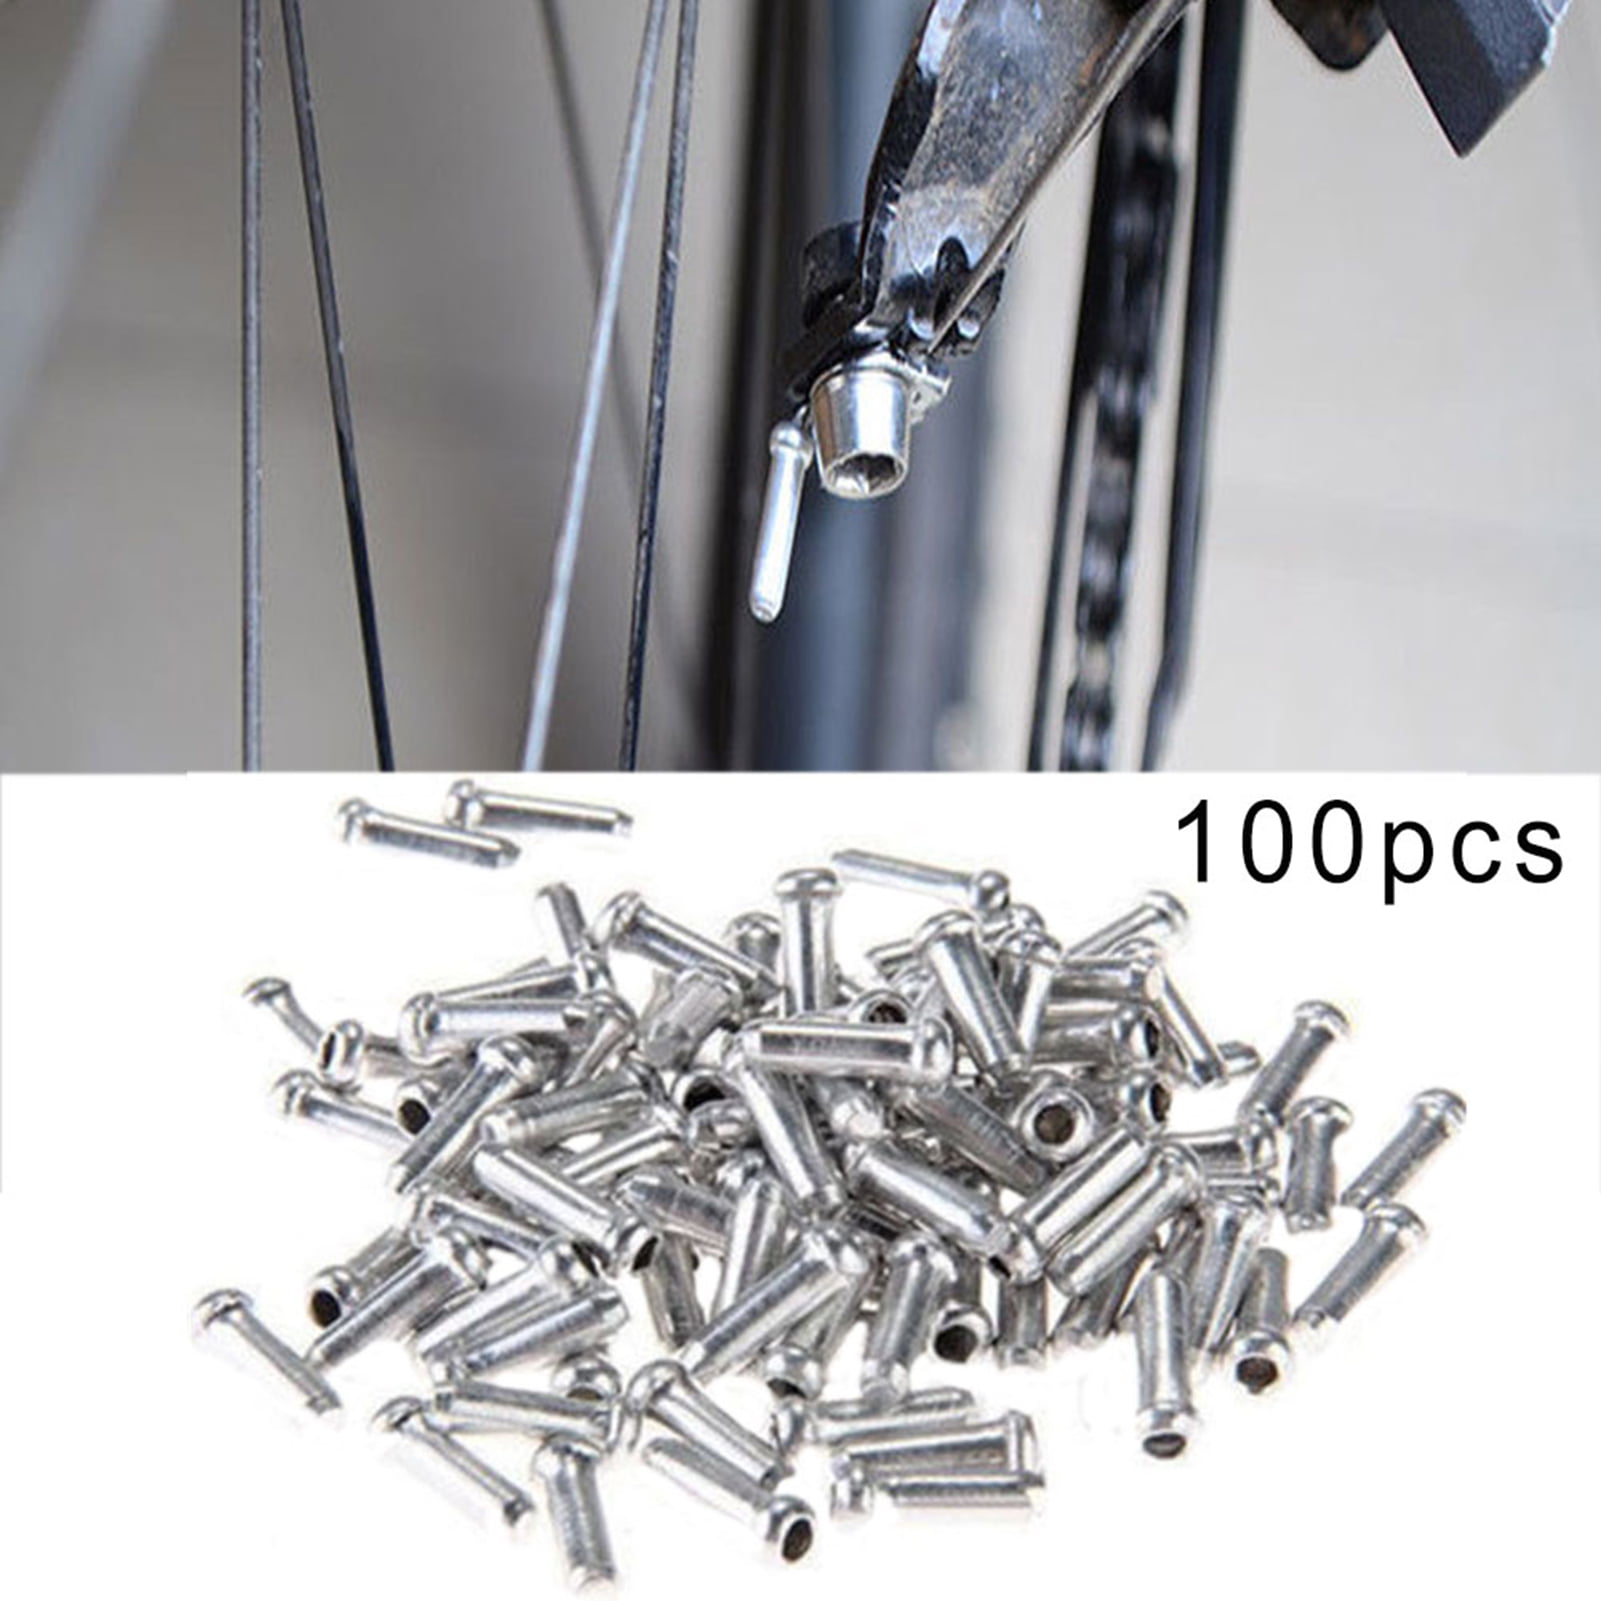 100pcs Shifter Brake Gear Inner Cable Tips Ends Caps Crimp Ferrule Bike Bicycle